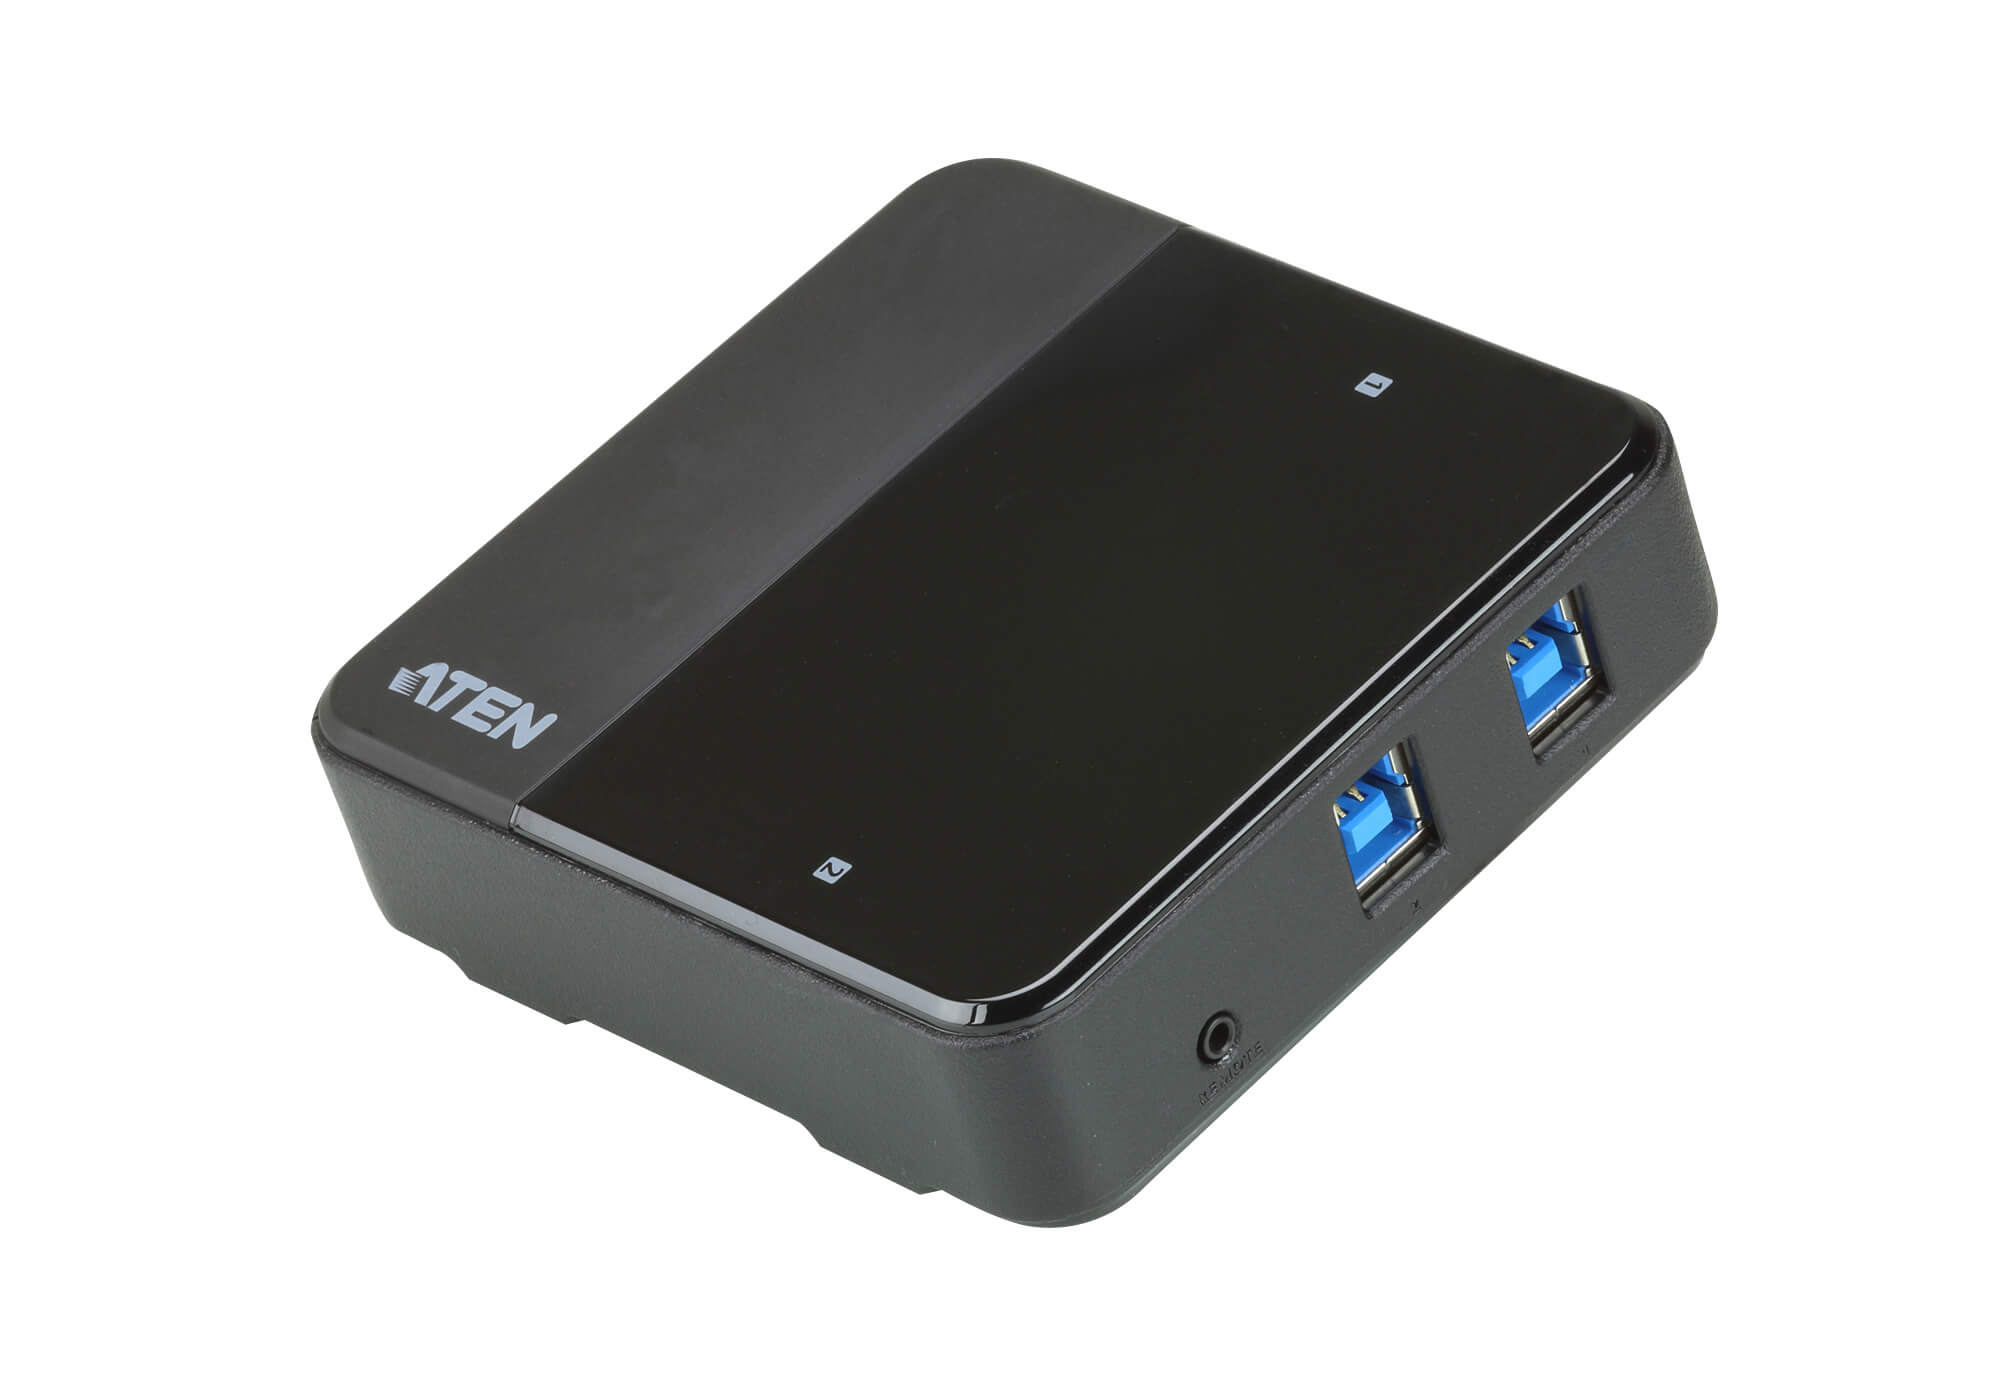 buy Aten Peripheral Switch 2x4 USB 3.1 Gen1, 2x PC, 4x USB 3.1 Gen1 Ports, Remote Port Selector, Plug and Play online from our Melbourne shop